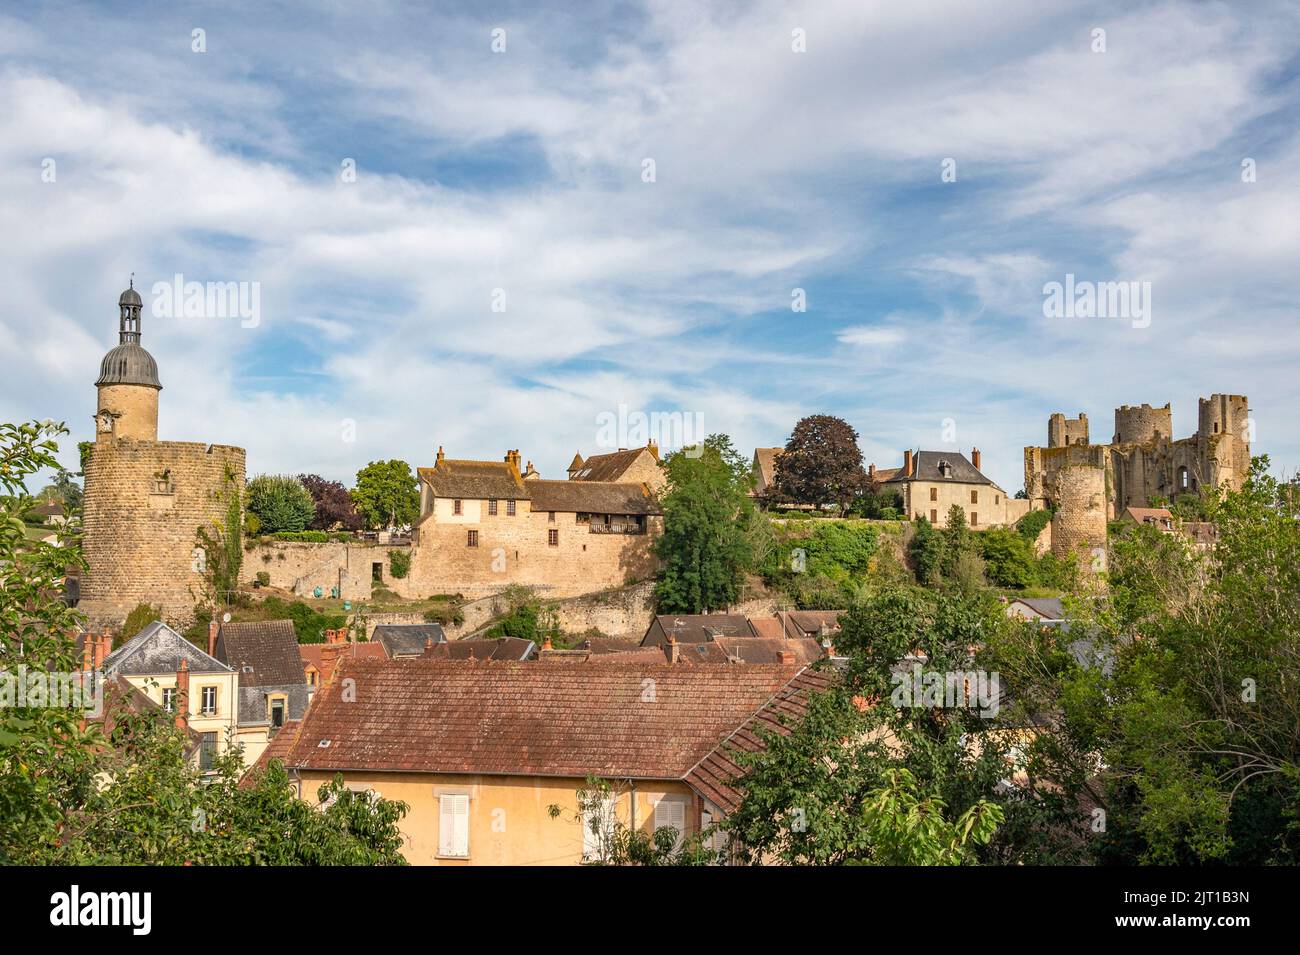 Once an impressive fortress with 15 towers, only 3 towers survived and today dominate the skyline of Bourbon-l'Archambault in Allier, France Stock Photo